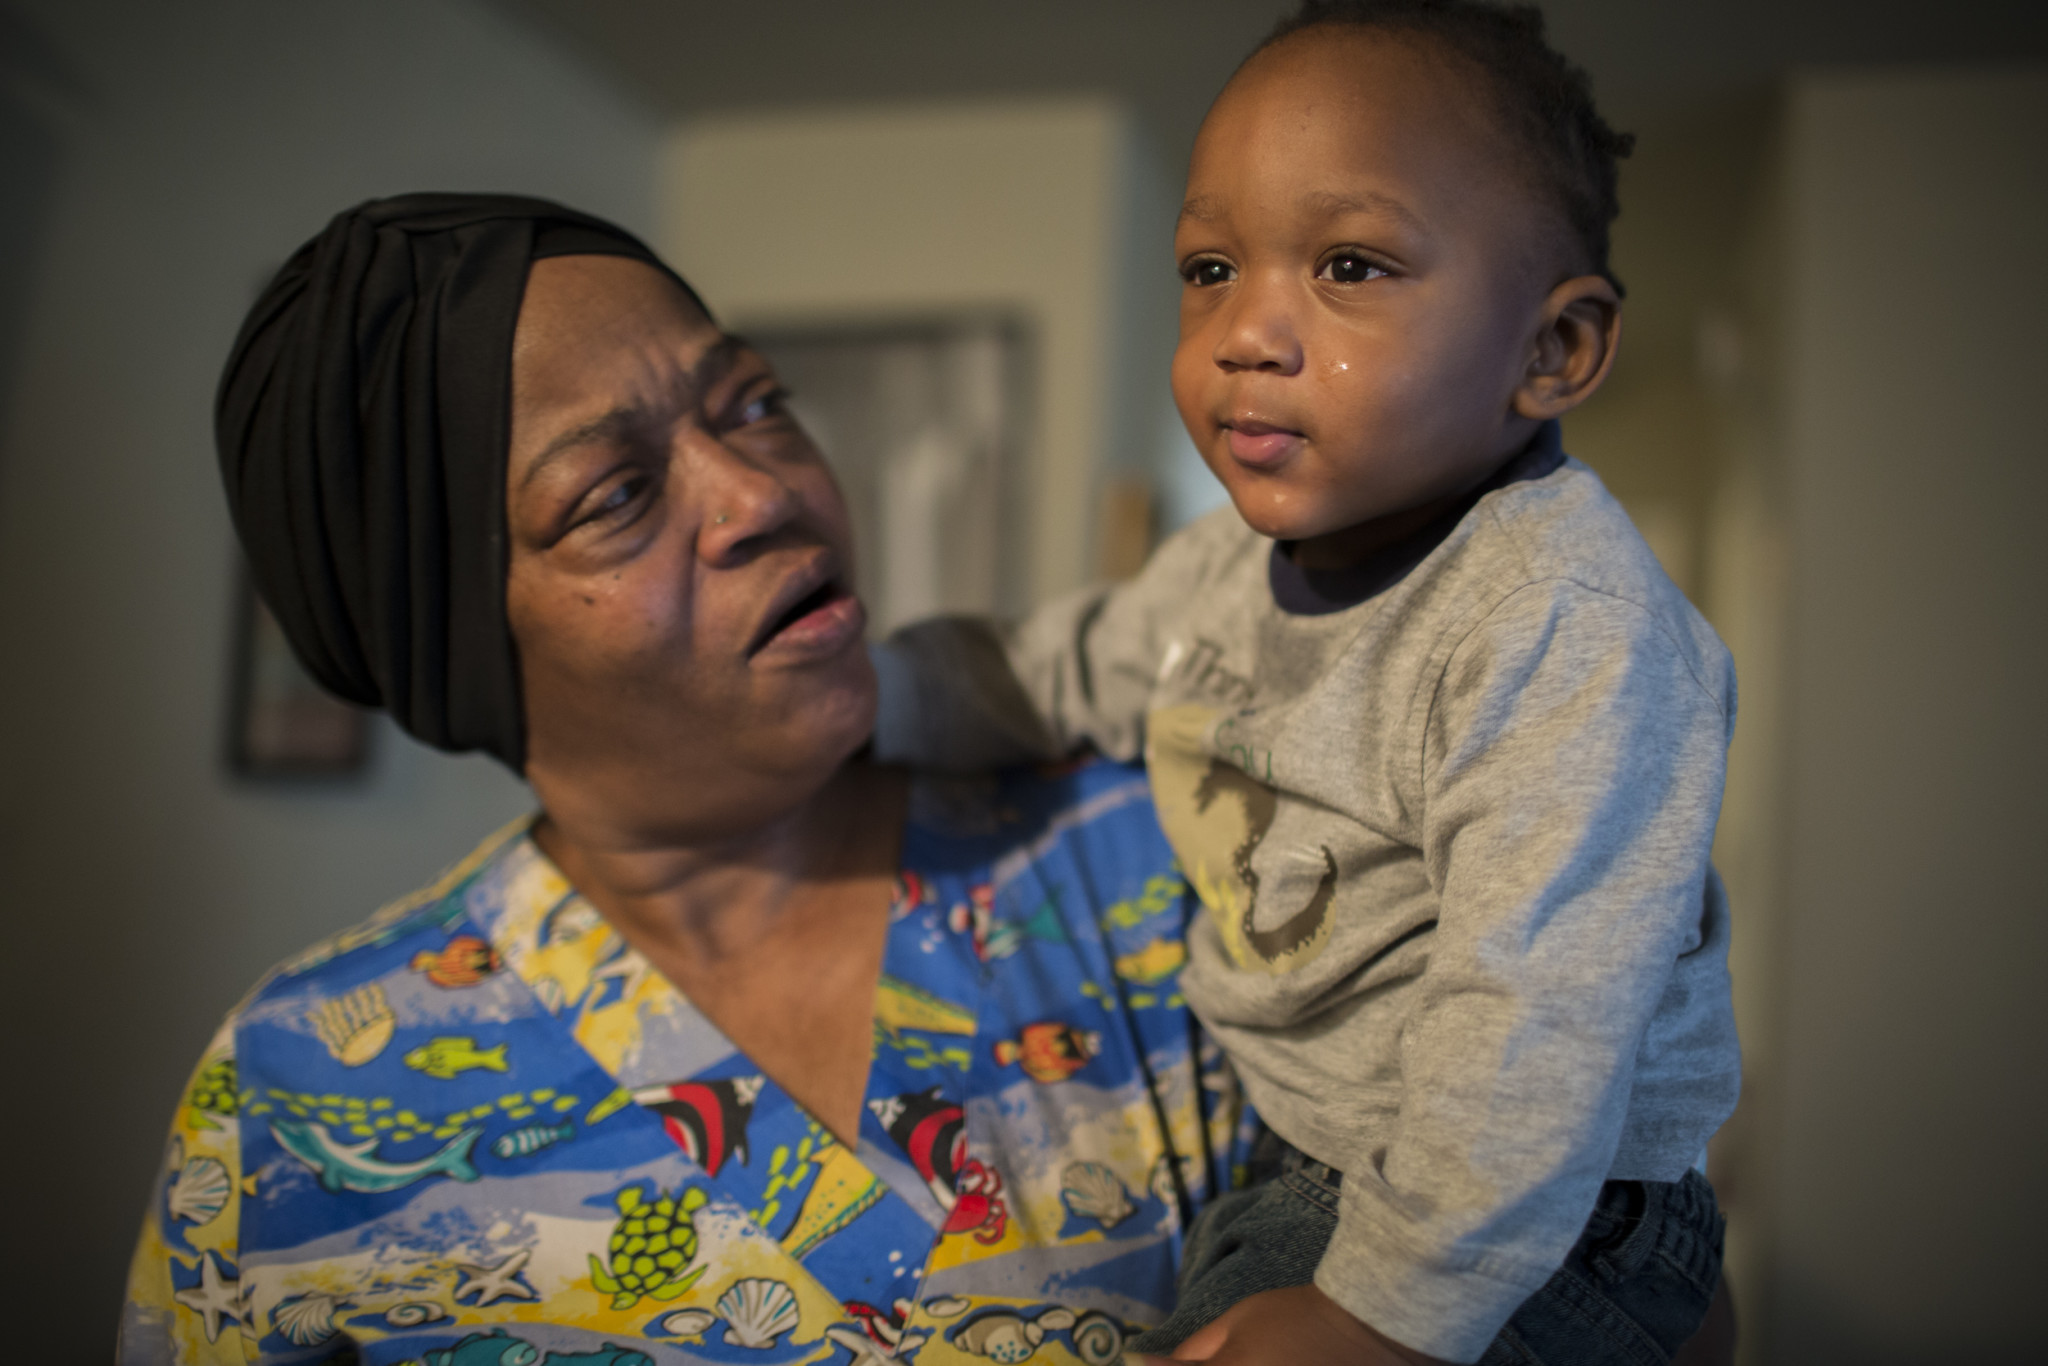 Tonya Kamara holds her grandson, Antonio, whom she has been taking care of since his mother was incarcerated. Because of her daughter’s ongoing drug addiction and erratic behavior, which Ms. Kamara believes threatens Antonio’s safety, she is applying for permanent custody of Antonio. 